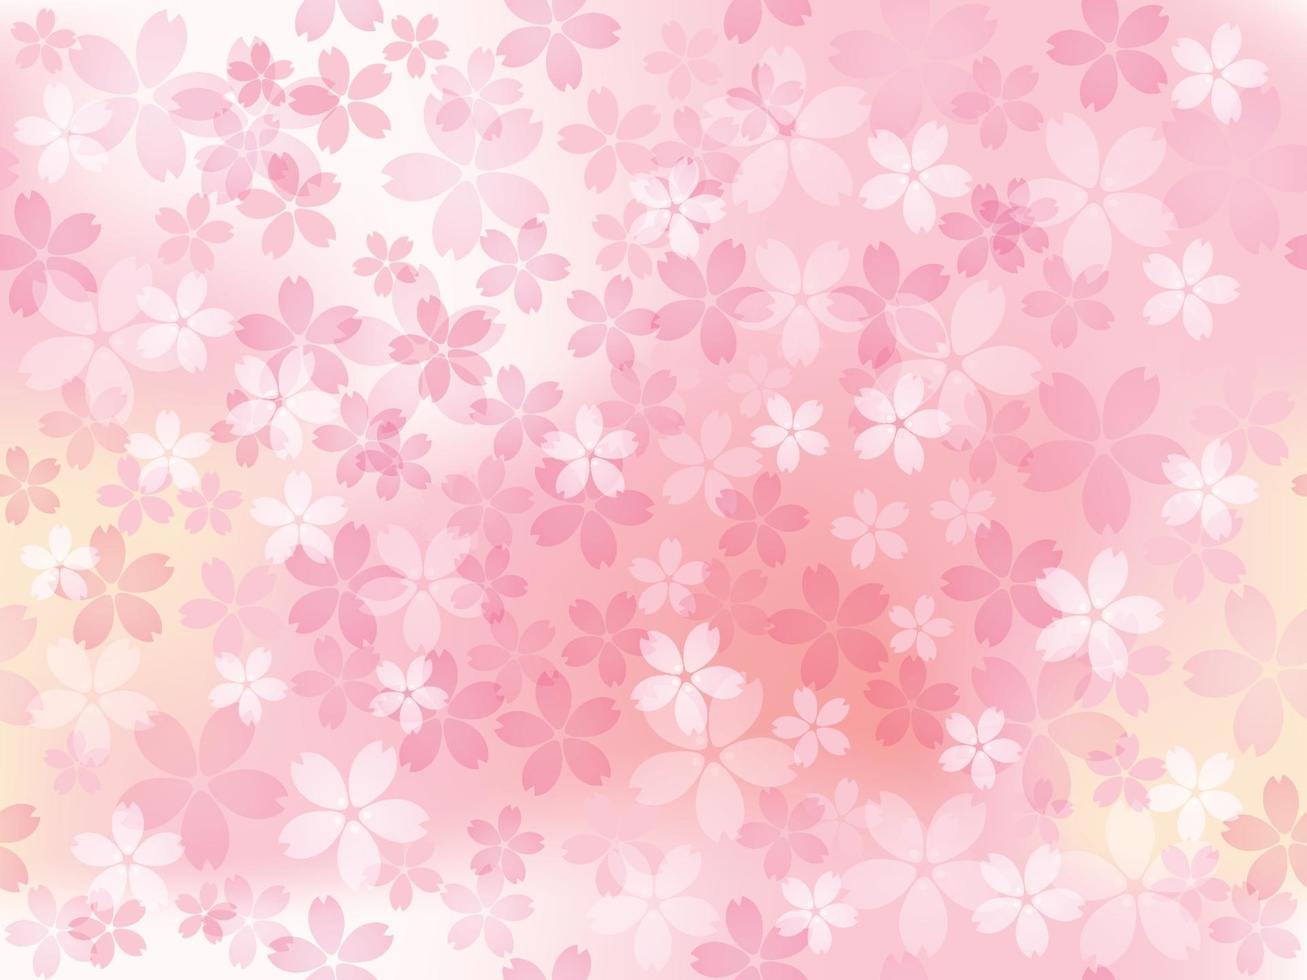 Seamless Vector Background Illustration With Cherry Blossoms In Full Bloom. Horizontally And Vertically Repeatable.